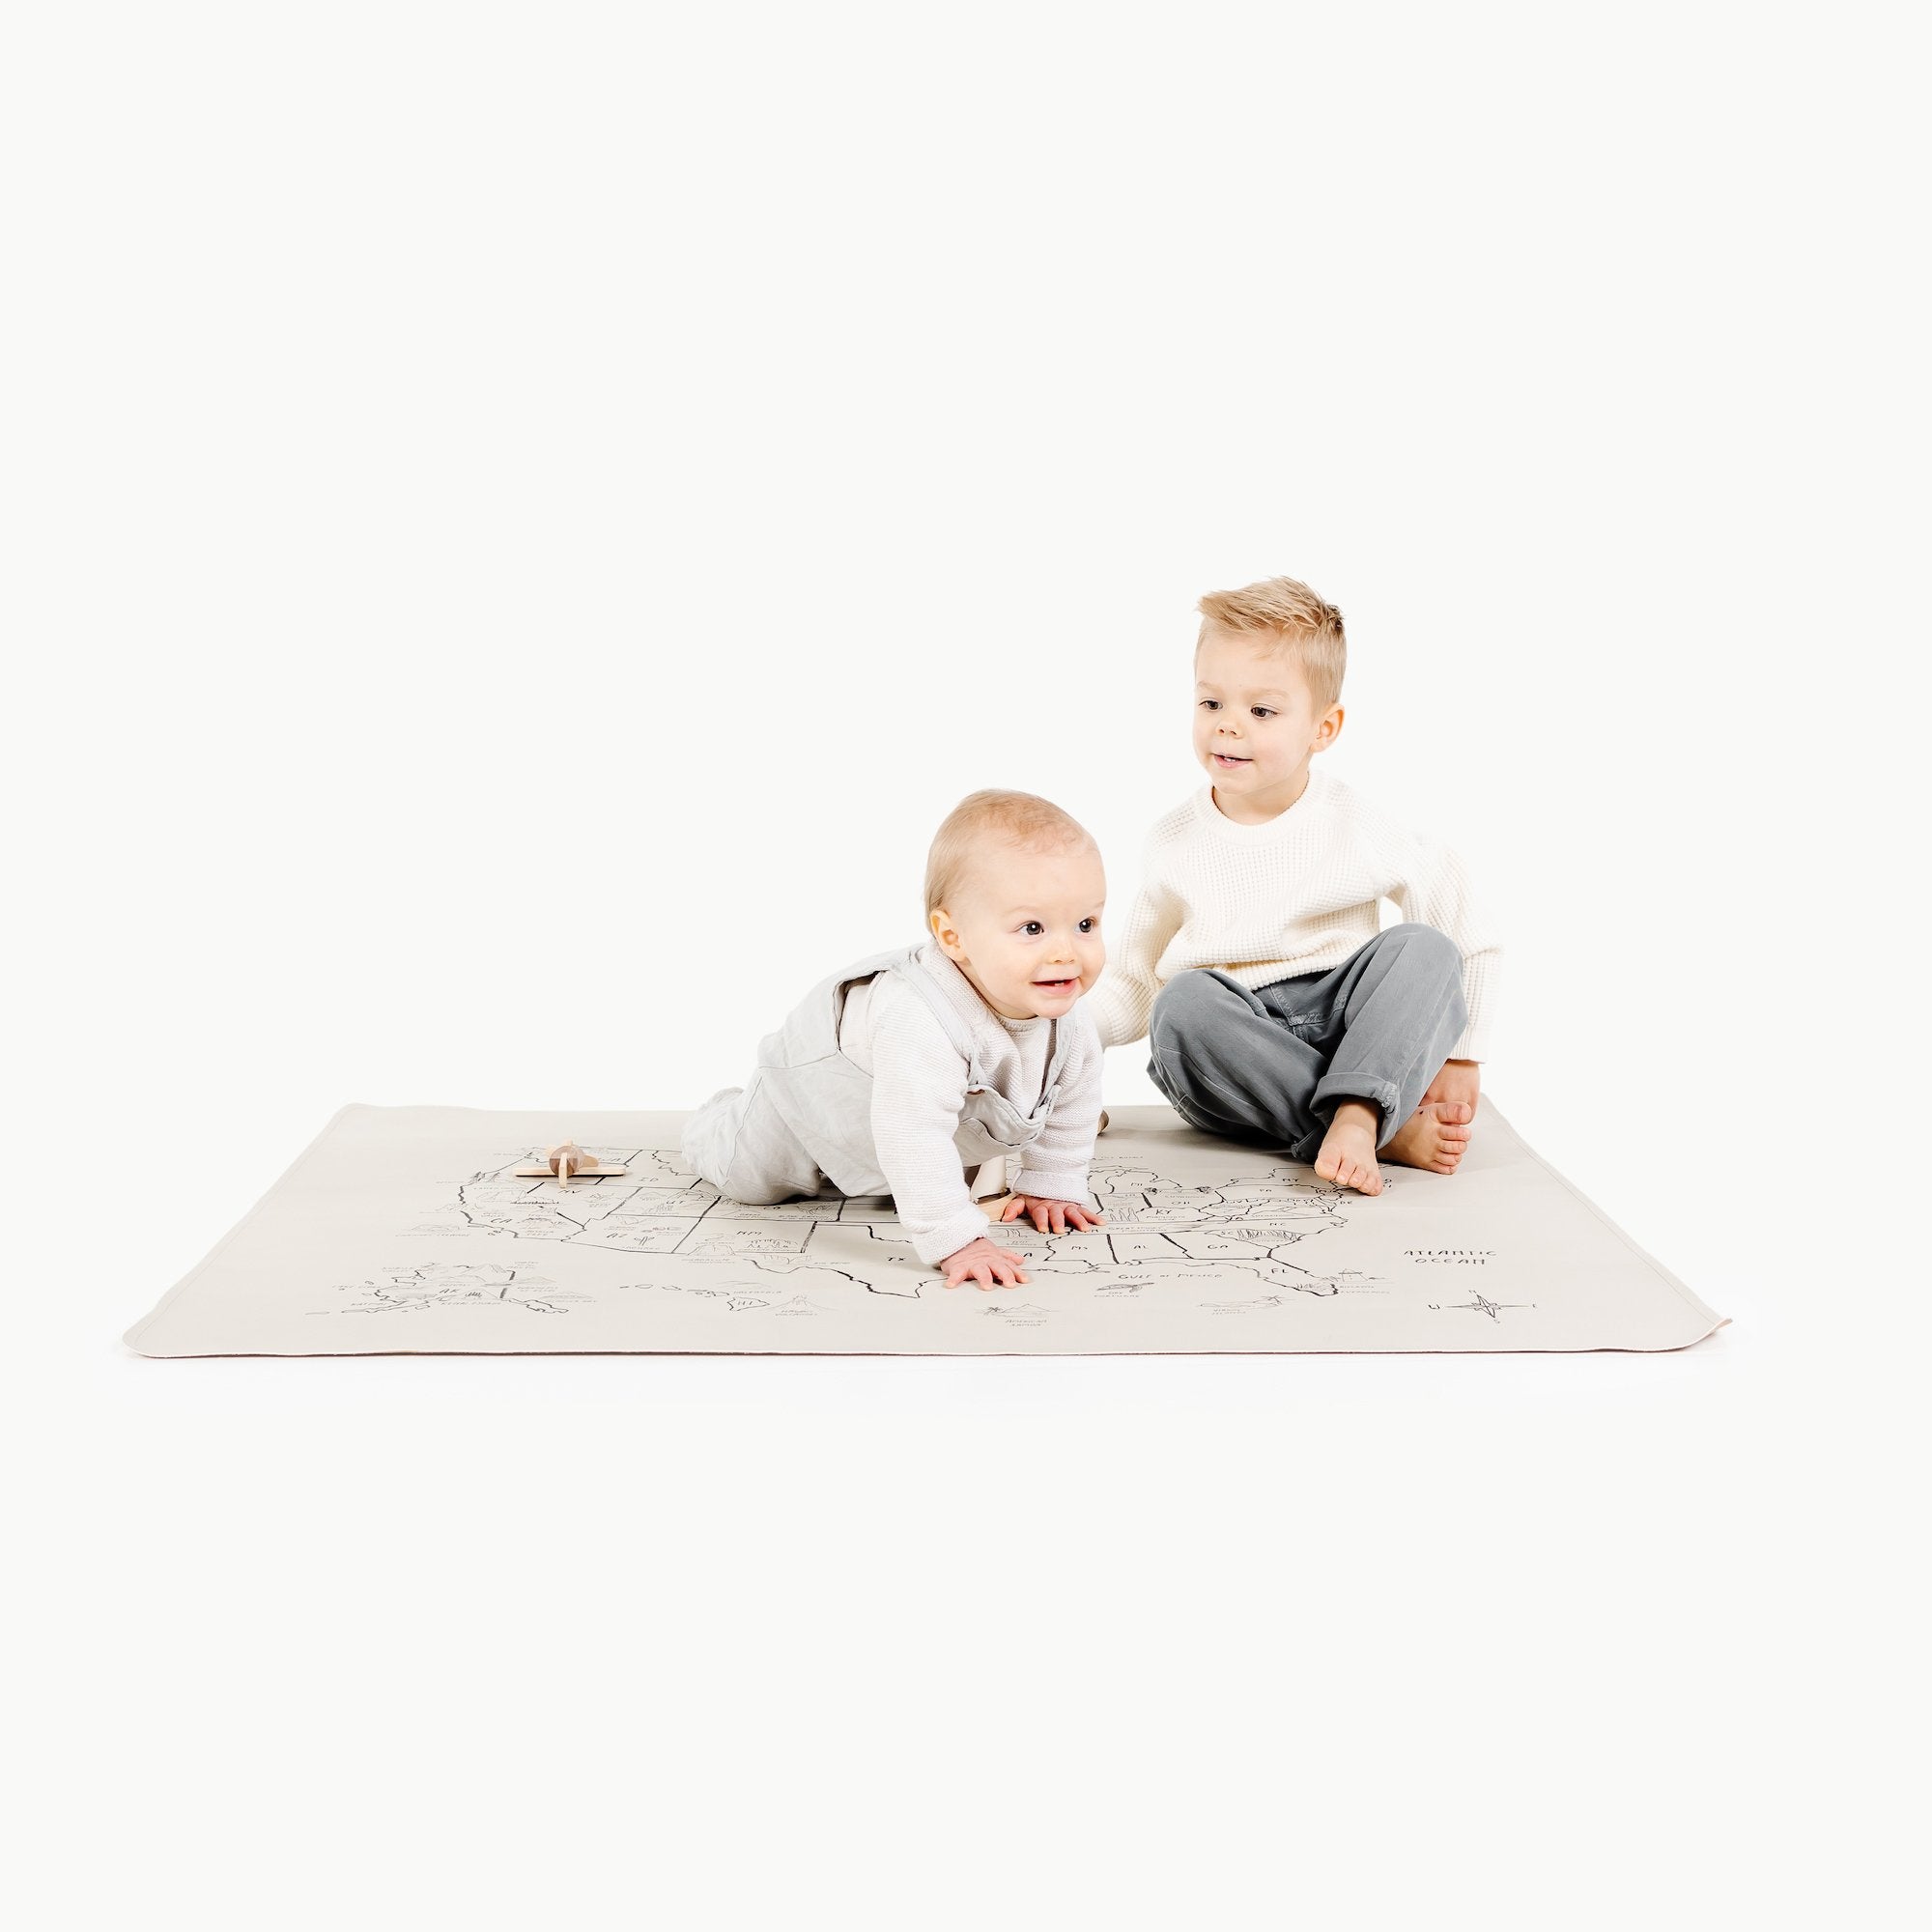 National Parks Map@Baby sitting on the National Parks Map Mini+ Mat